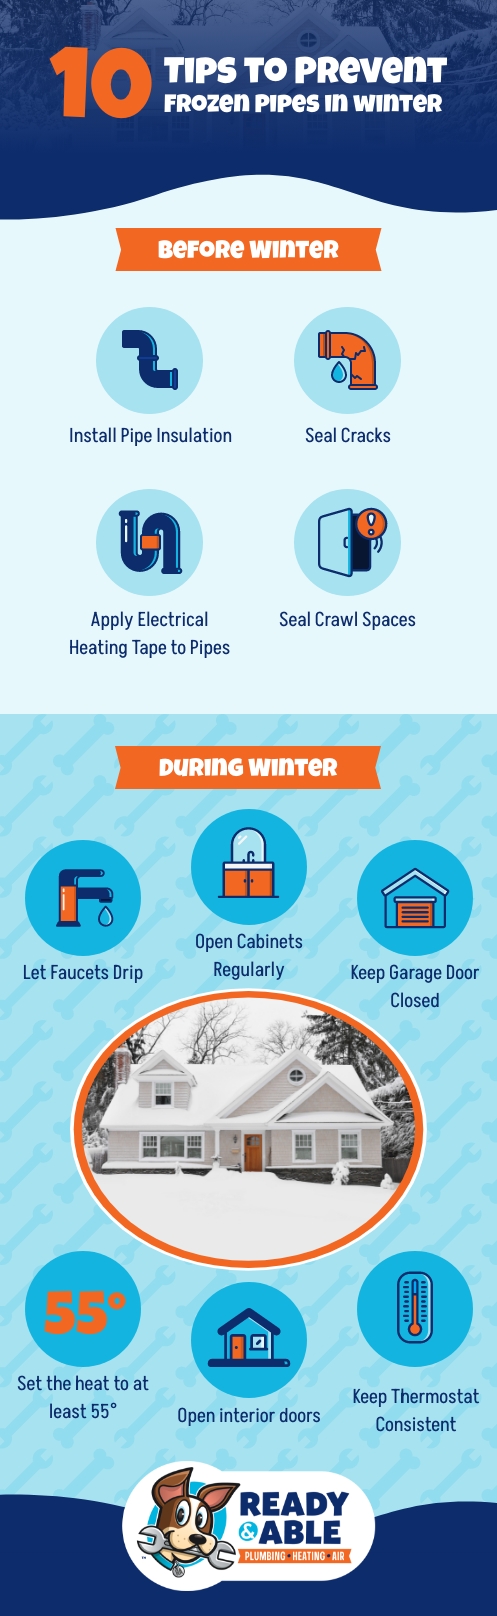 How to Keep Pipes From Freezing